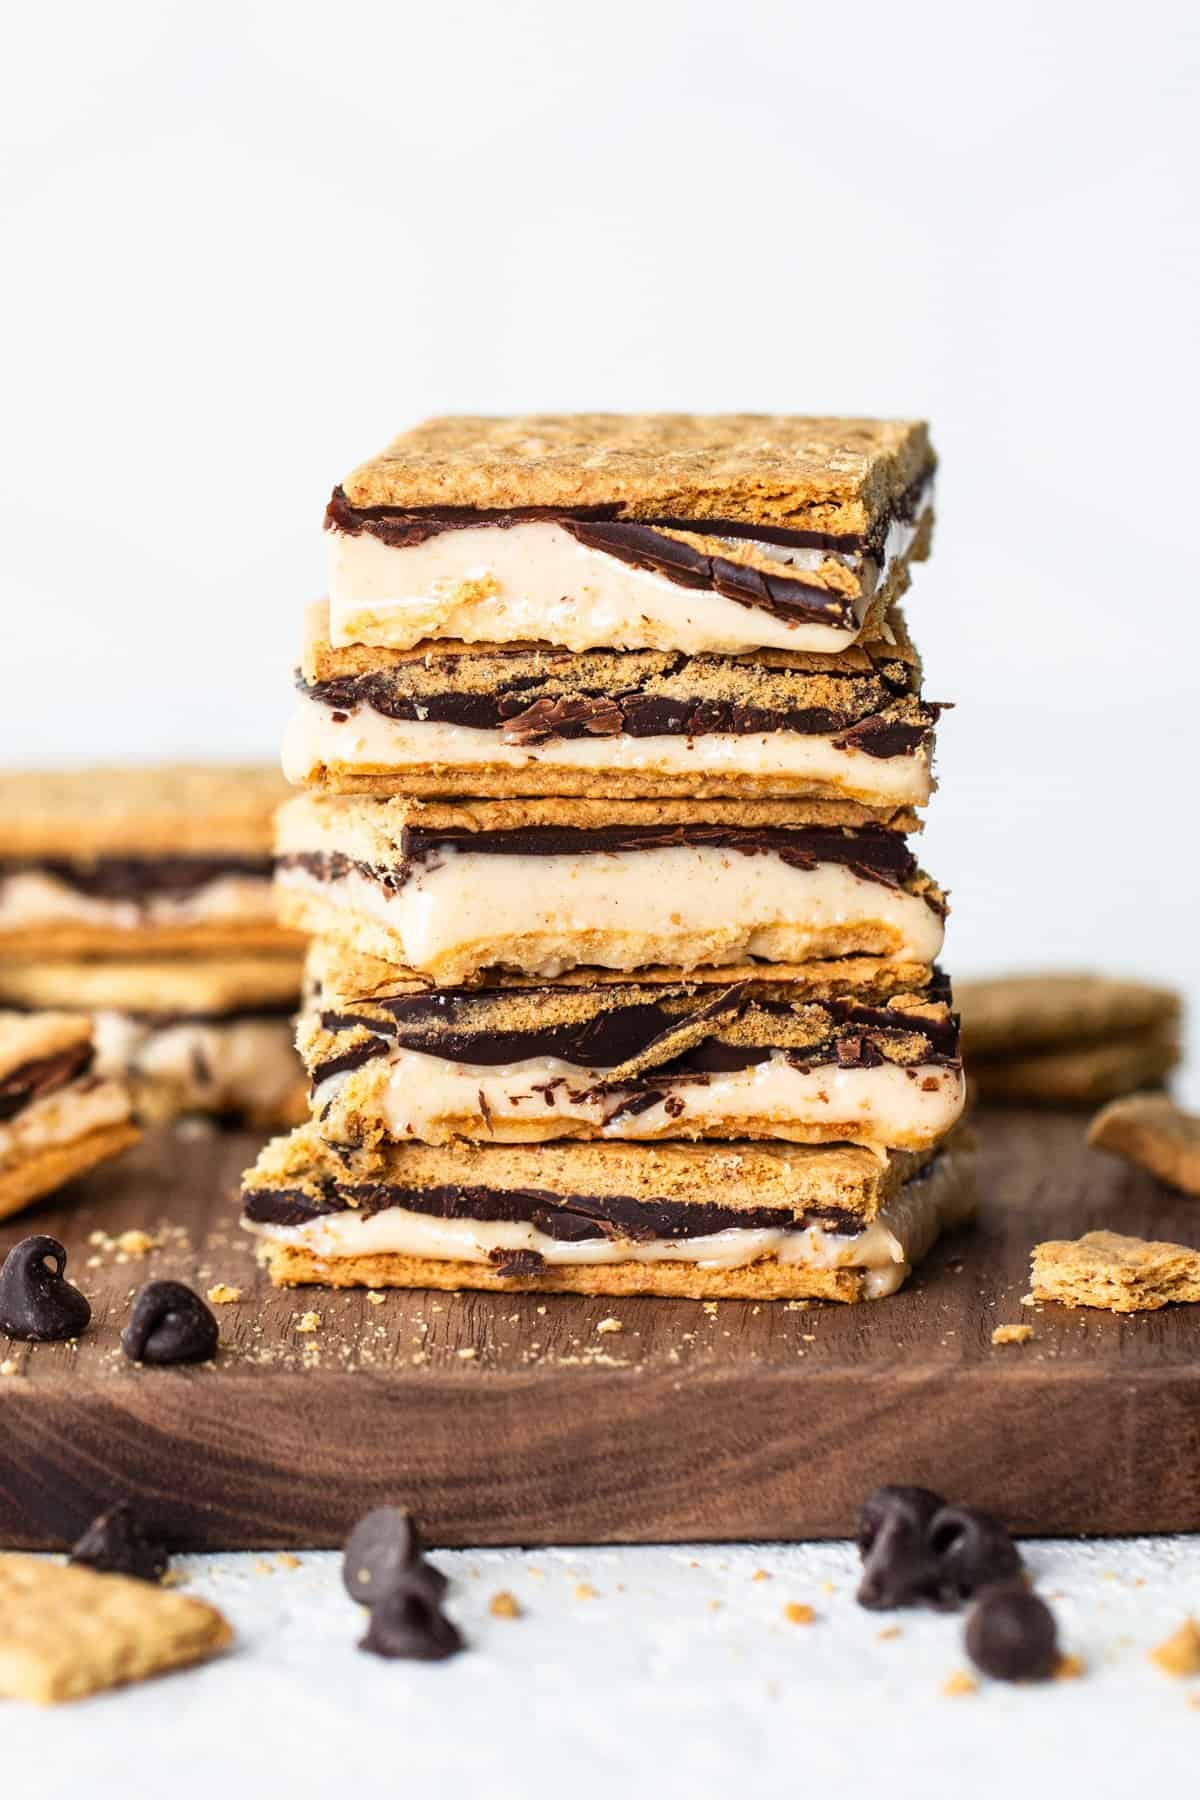 A stack of s'mores bars with layers of graham crackers, melted marshmallow, and chocolate on a wooden board, with scattered chocolate chips around.